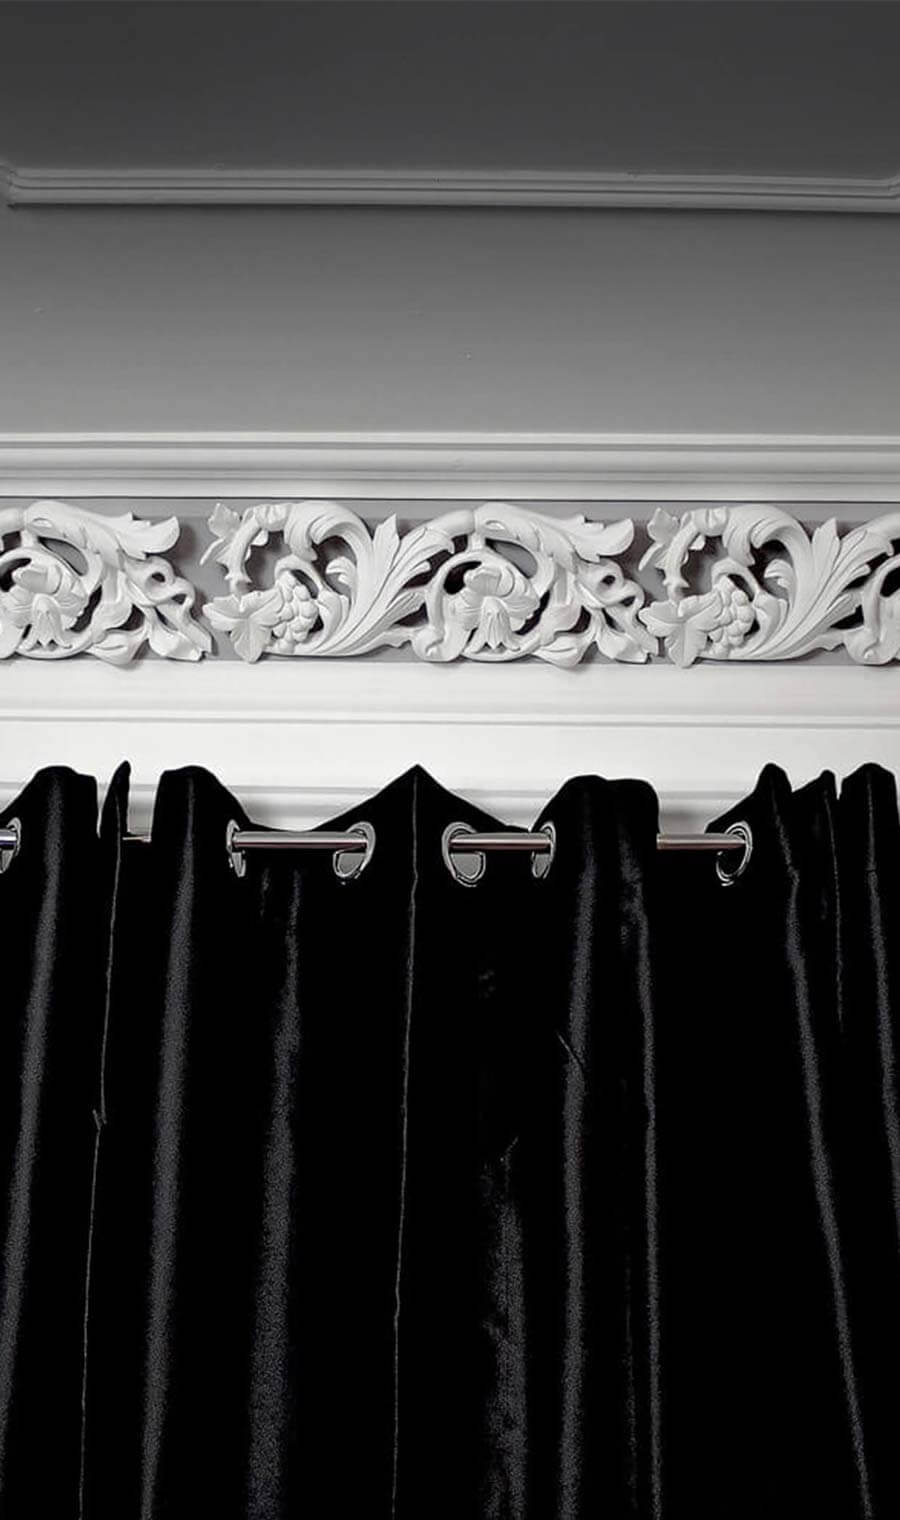 ORNAMETAL PLASTERWORK PICK FROM OUR WIDE RANGE OF PLASTER DECORATIONS